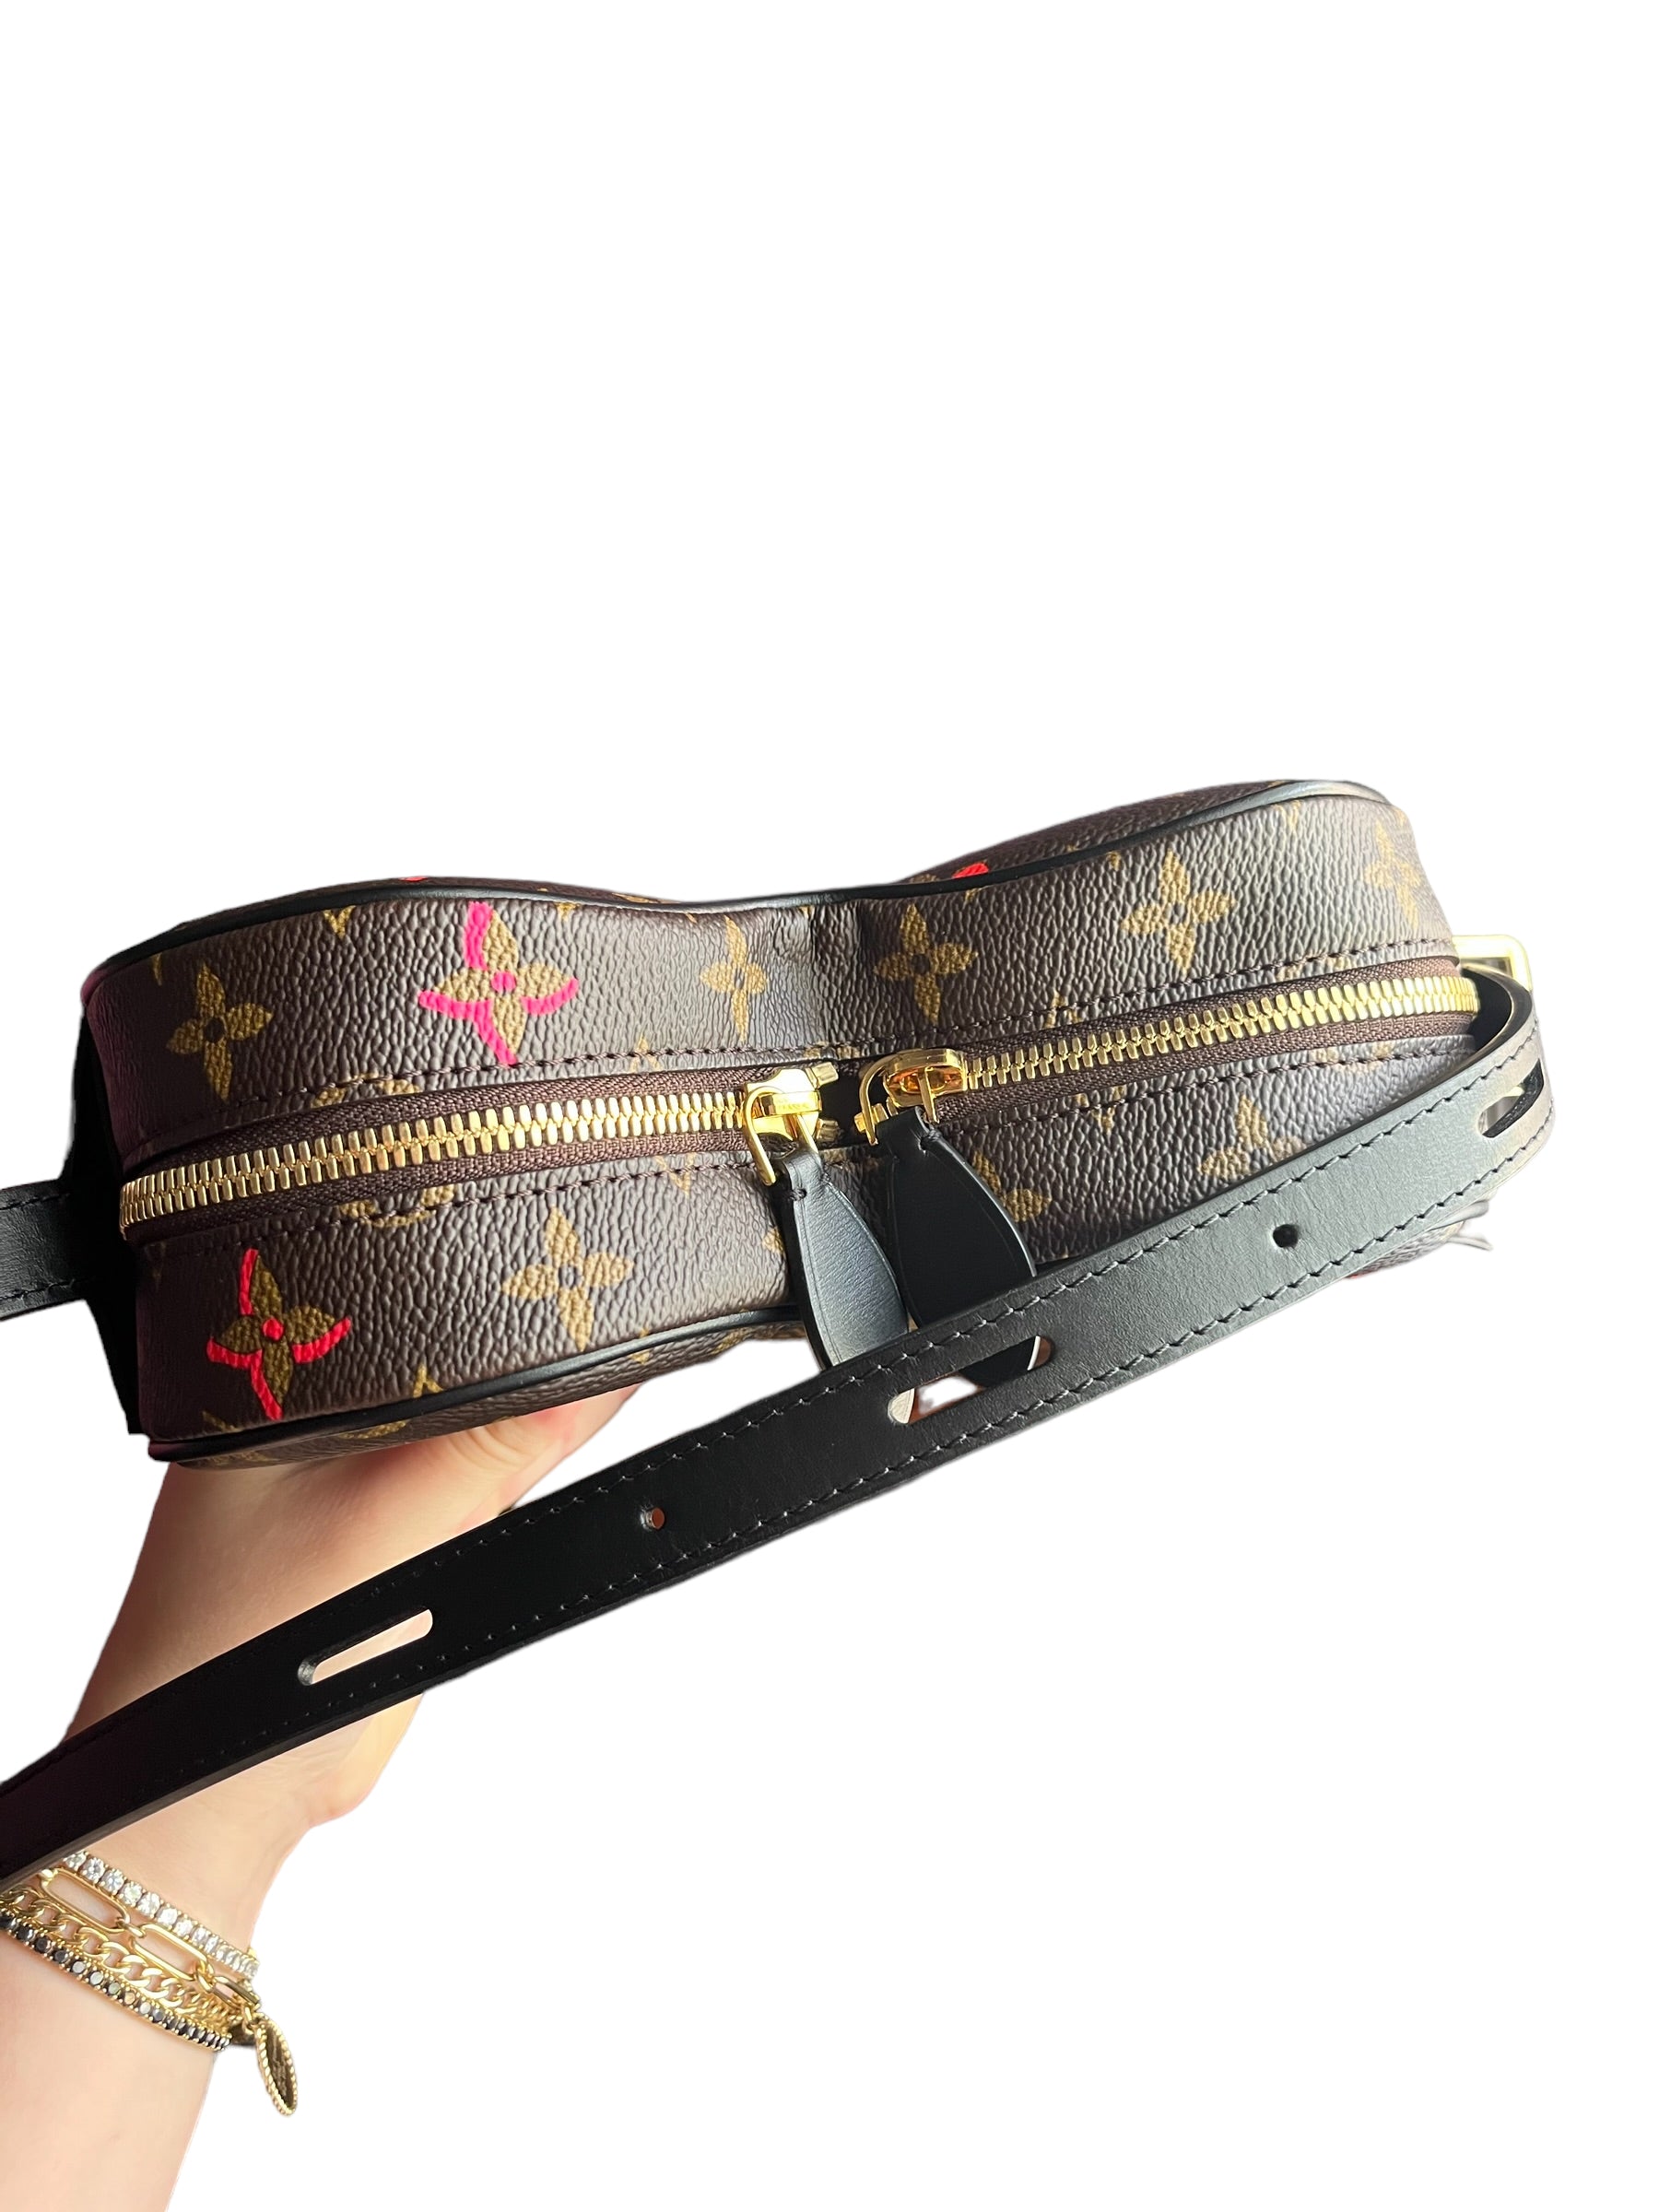 Louis Vuitton 2021 Limited Edition Heart Bag – Its A Luv Story